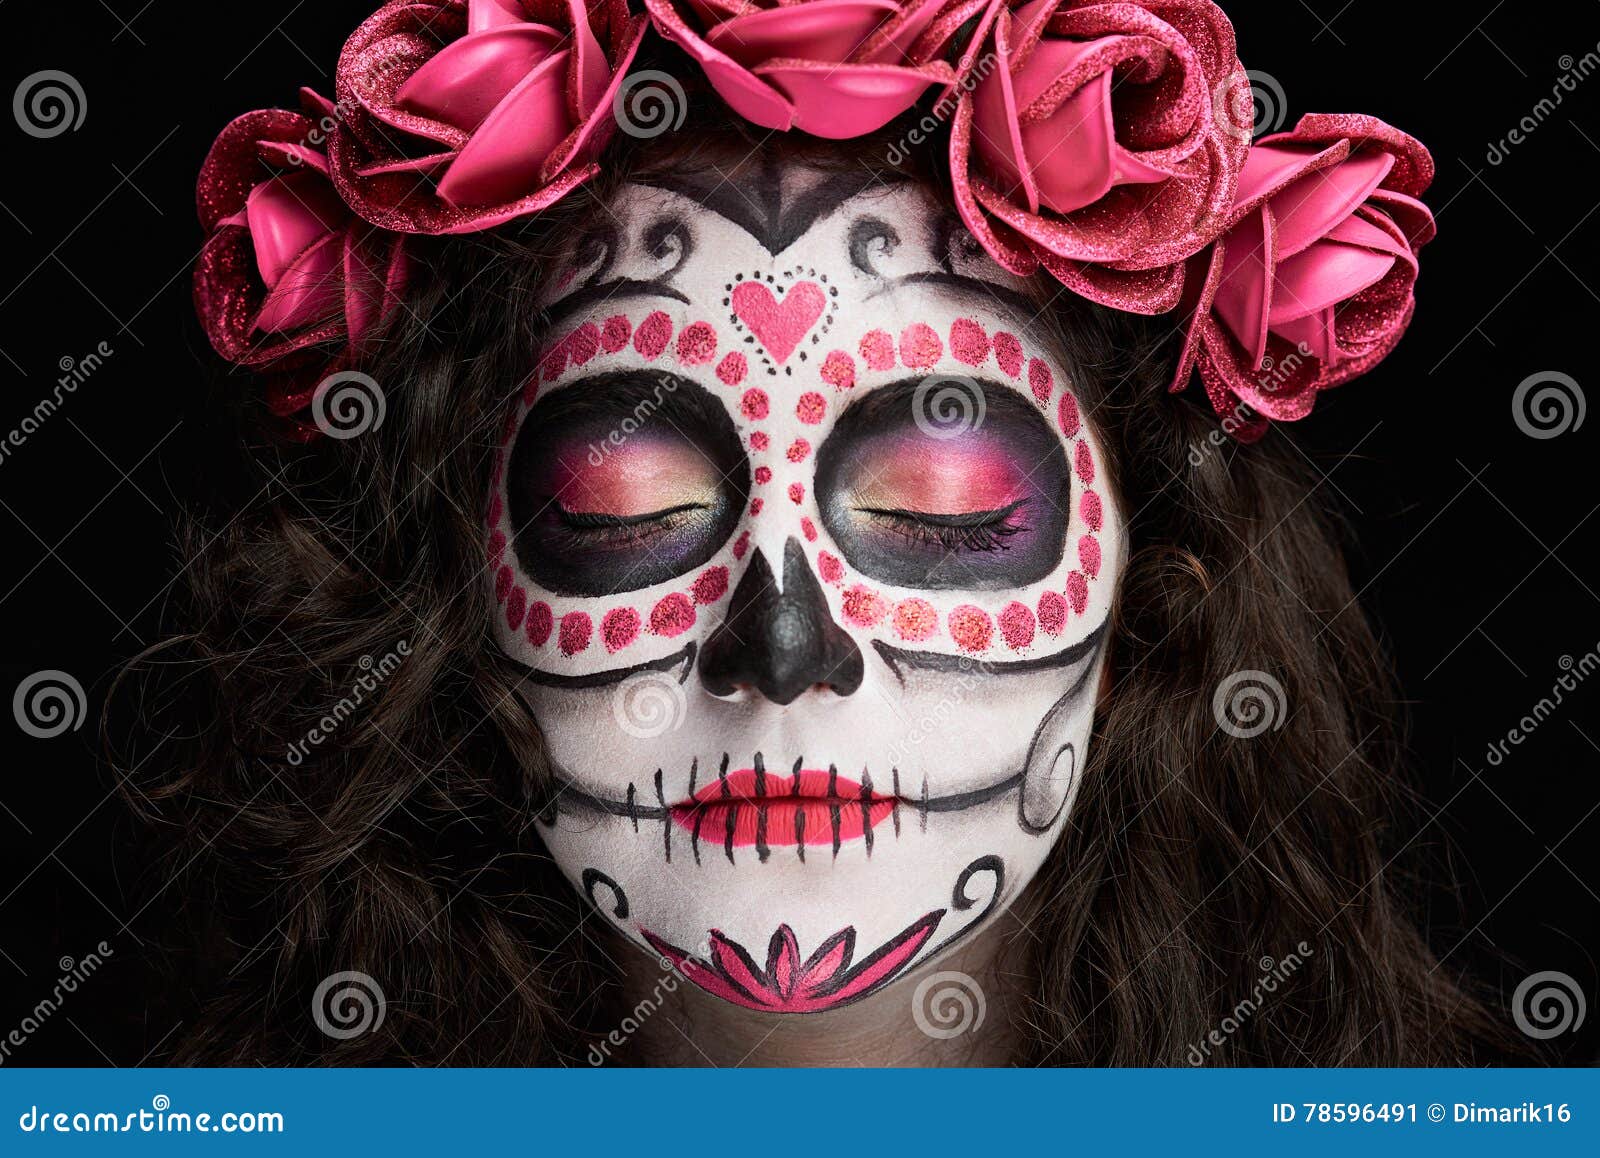 Skull Face with Closed Eyes Stock Image - Image of evil, closed: 78596491